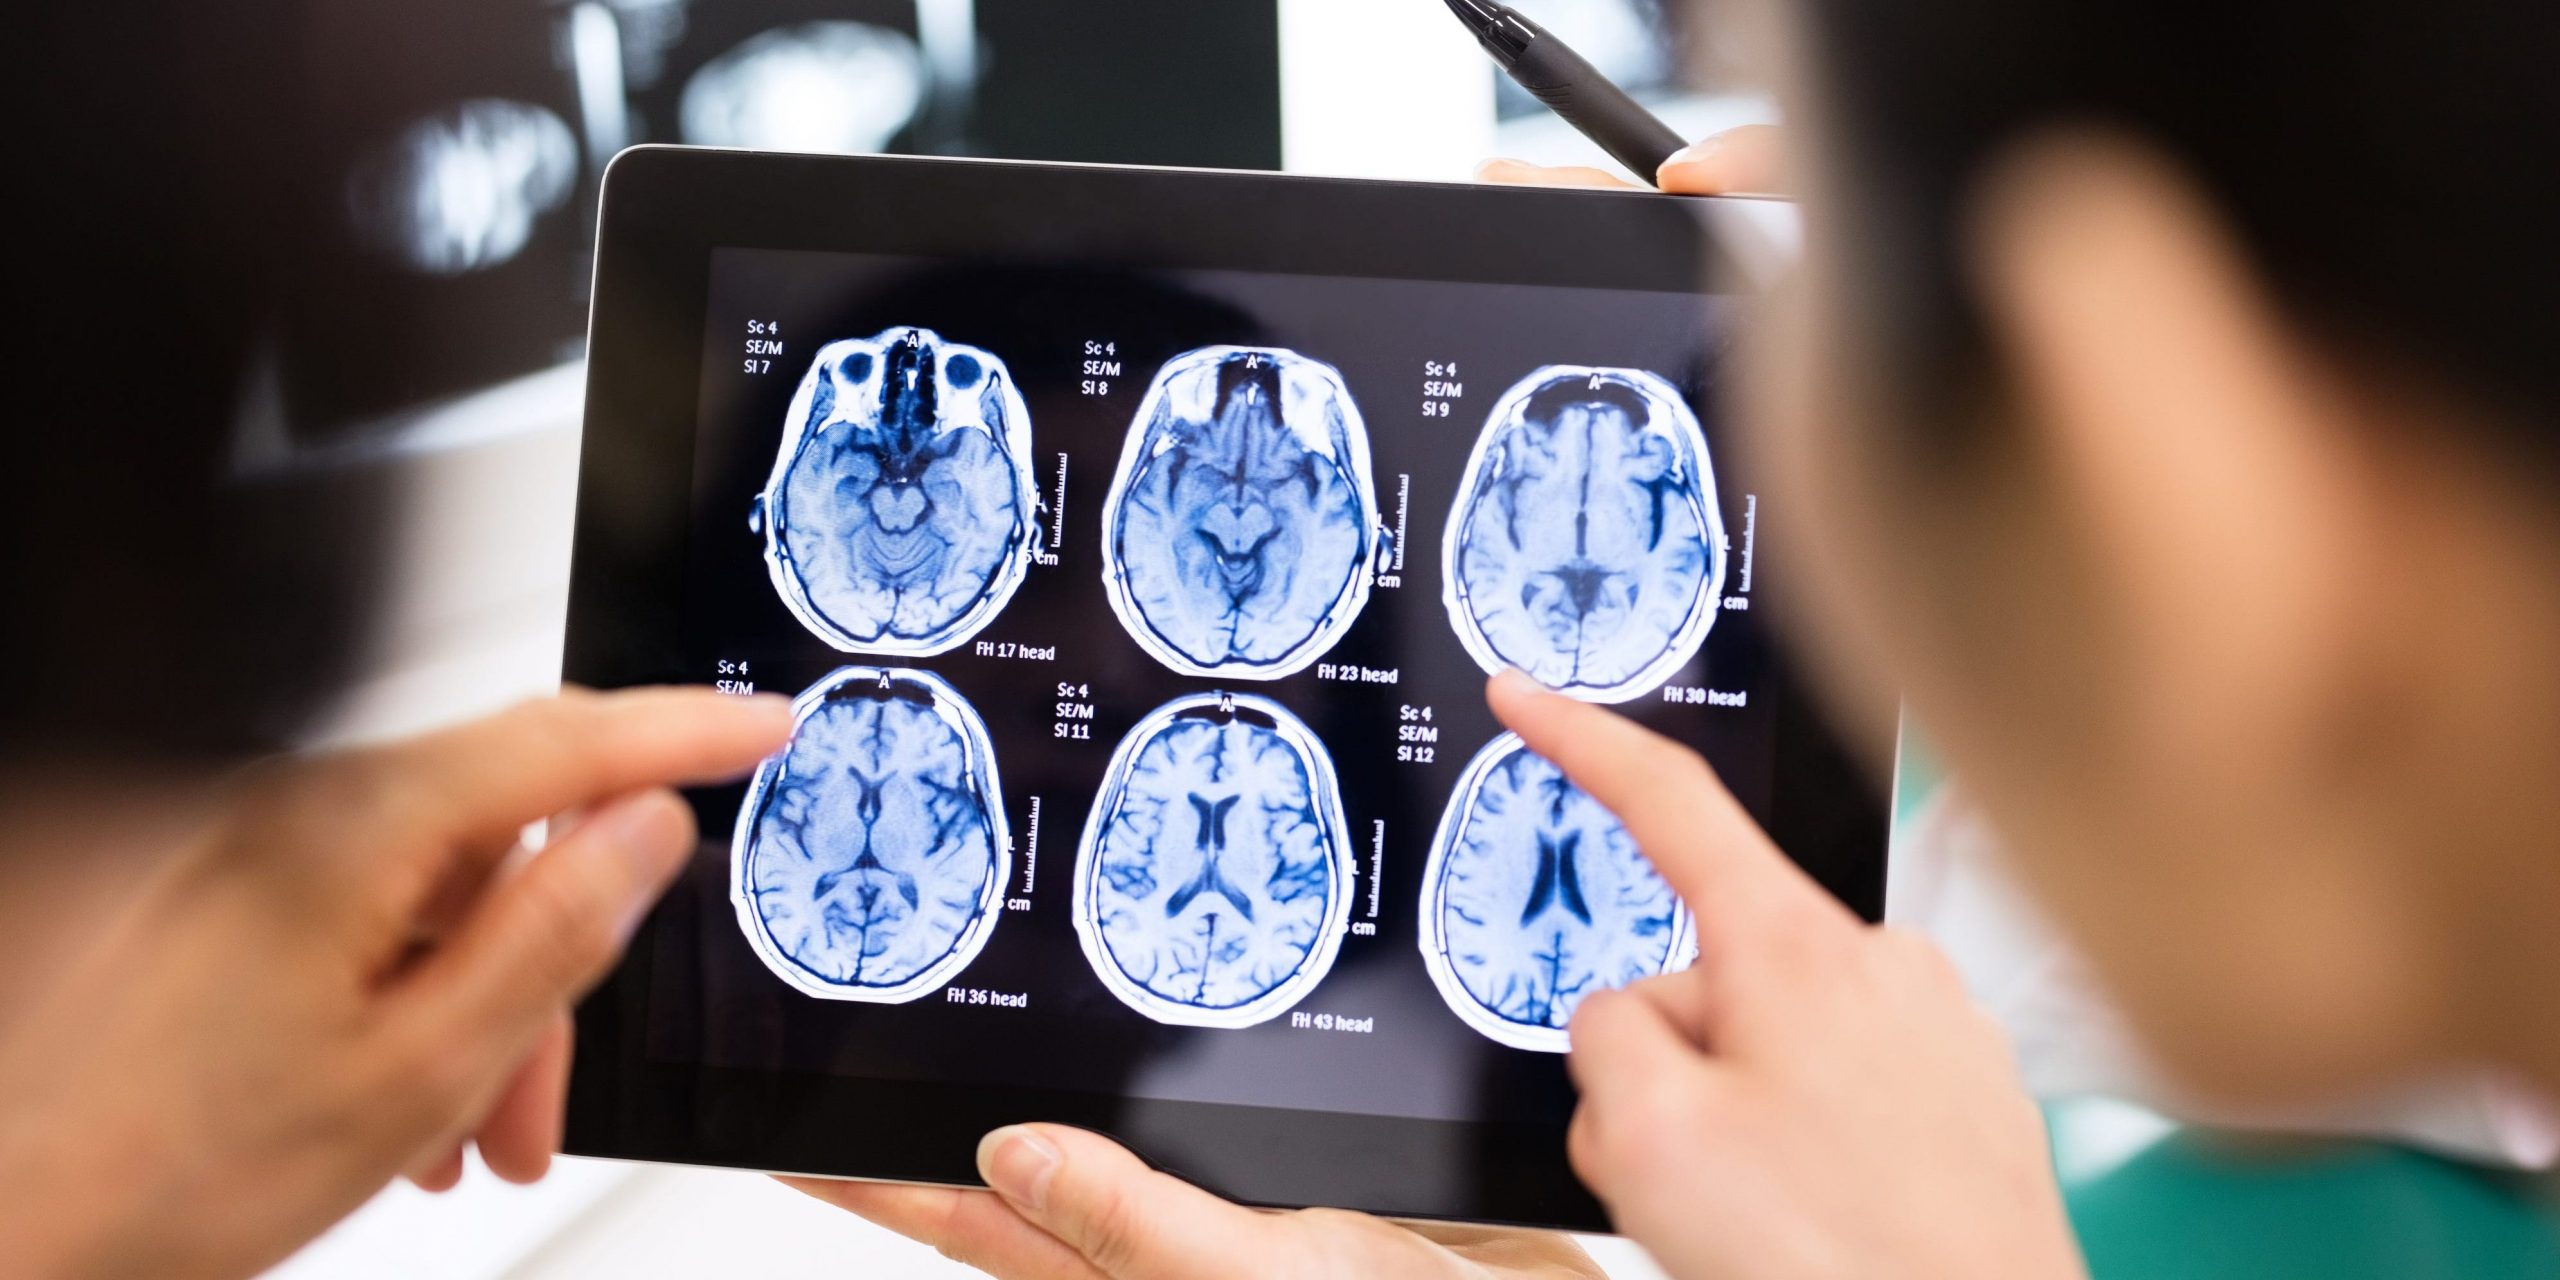 Two people at a hospital use a digital tablet to look at brain scans.